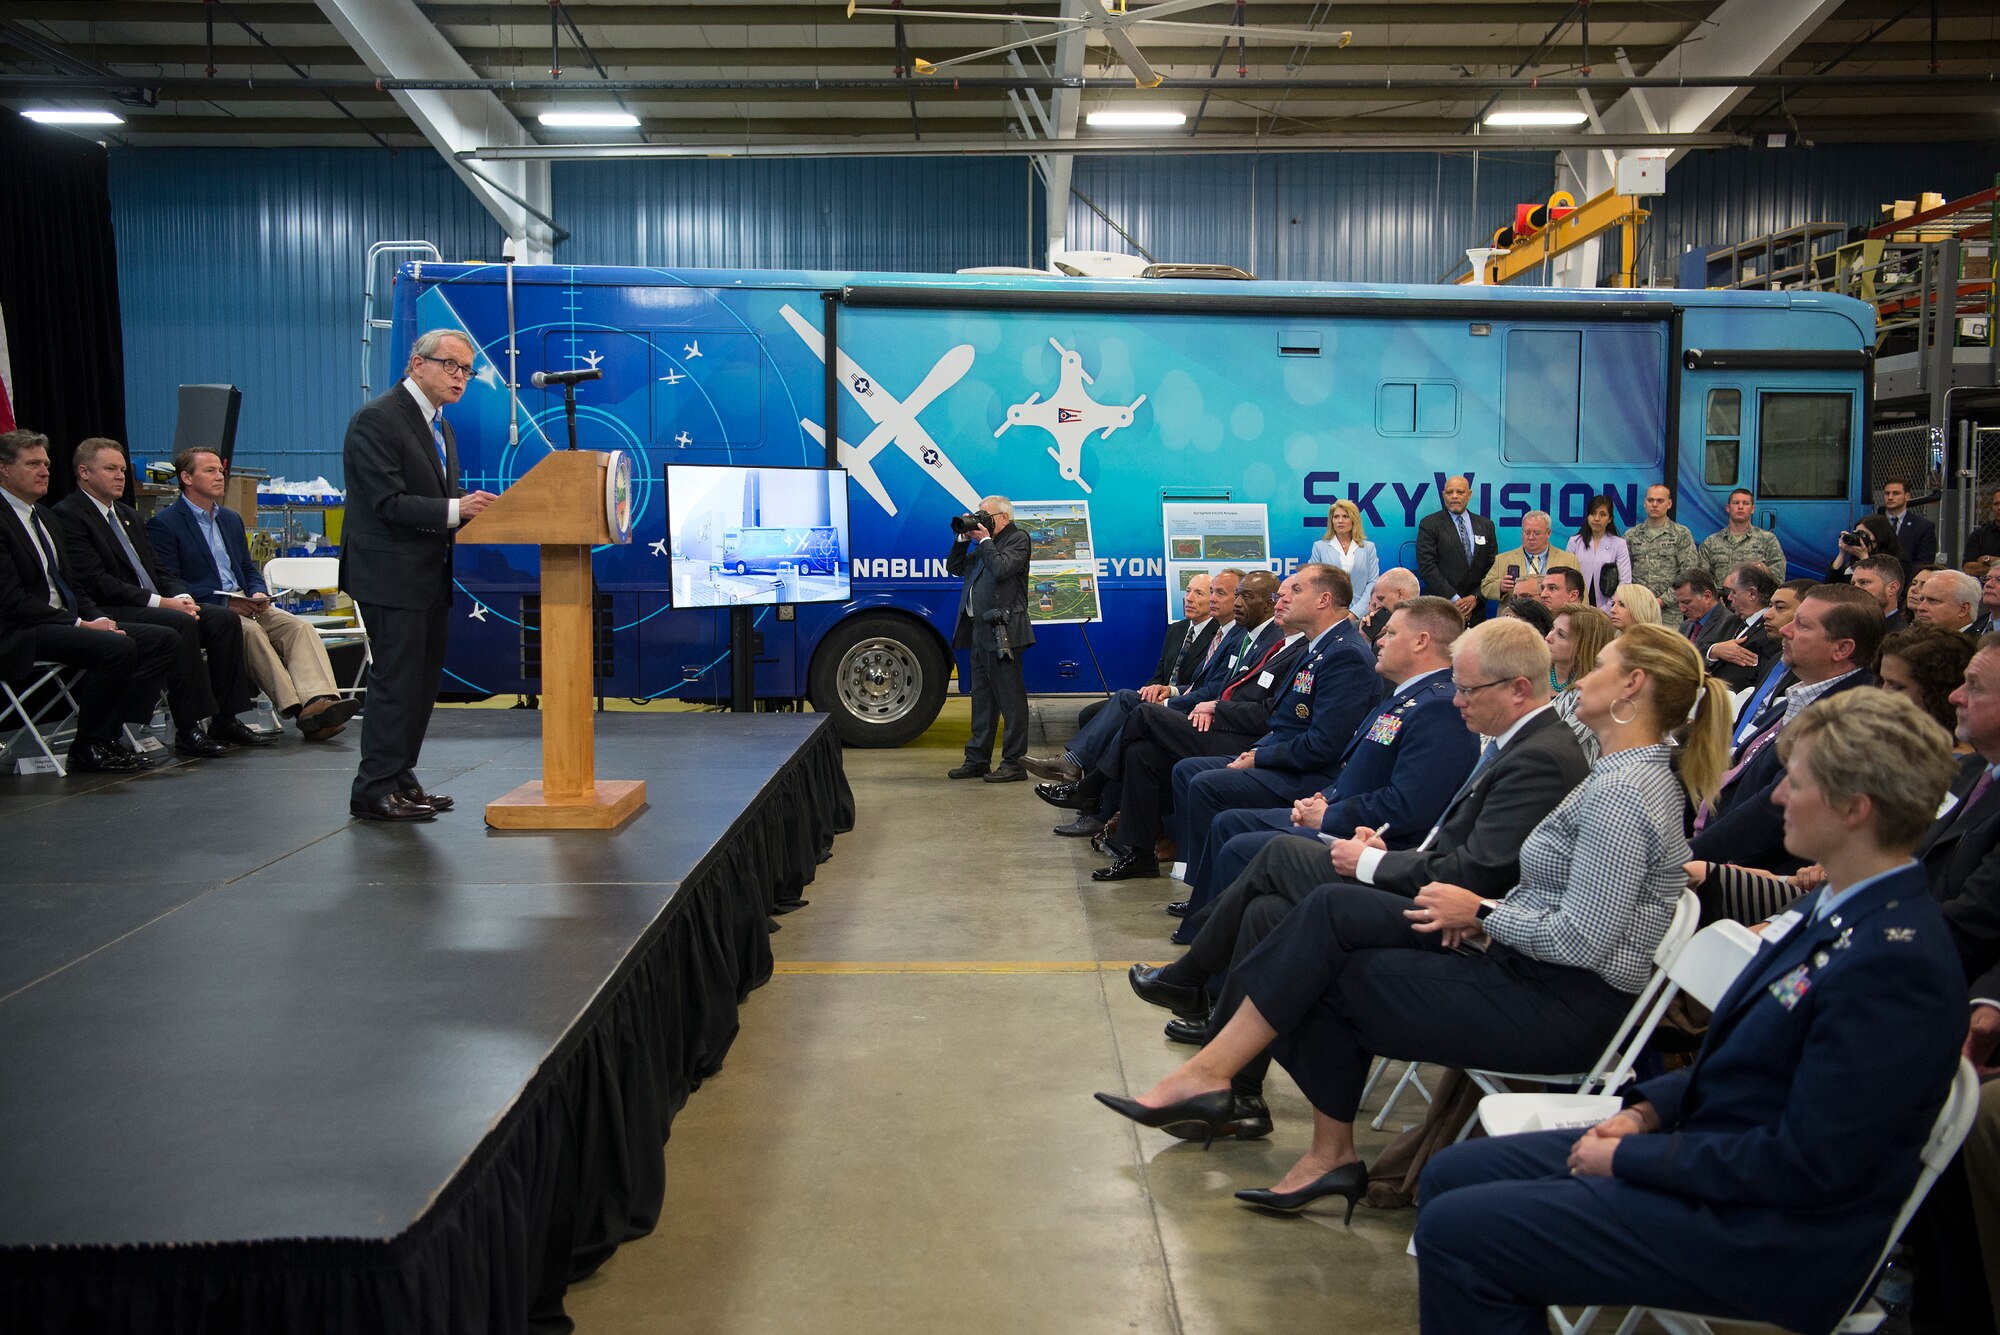 Ohio Governor Mike DeWine addresses those attending the announcement of the Federal Aviation Administration granting a Certificate of Waiver or Authorization to the Air Force Research Laboratory for beyond visual line of sight flights of unmanned aerial systems during an event at the Sprinfield-Beckley Municipal Airport April 26, 2019. (U.S. Air Force photo by R.J. Oriez)